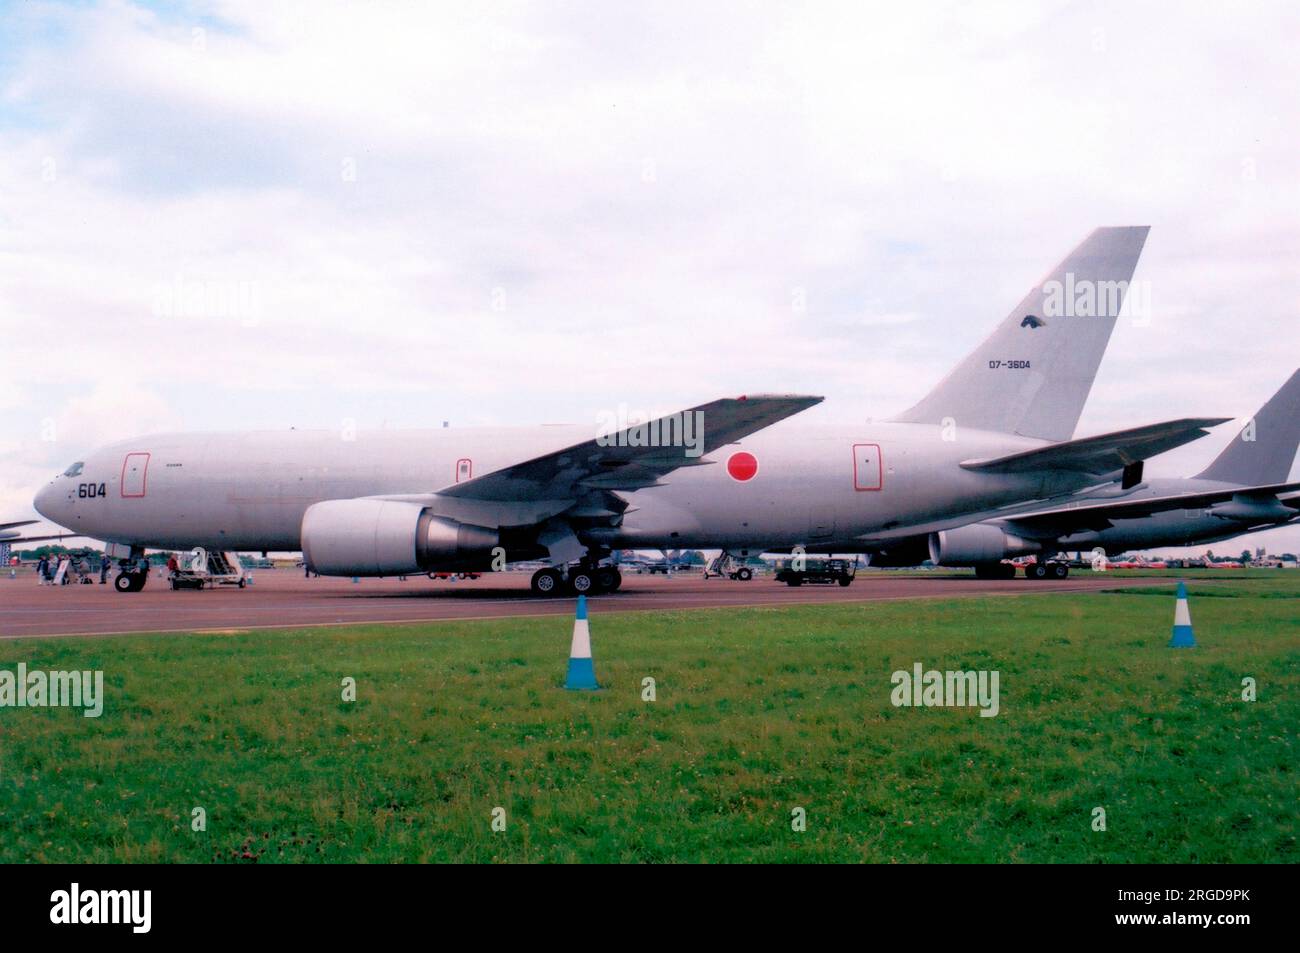 Japanese Air Self Defence Force - Boeing KC-767J 07-3604 (msn 35498) of 404 Hikotai, at RAF Fairford for the Royal International Air Tattoo on 5 July 2012. Stock Photo